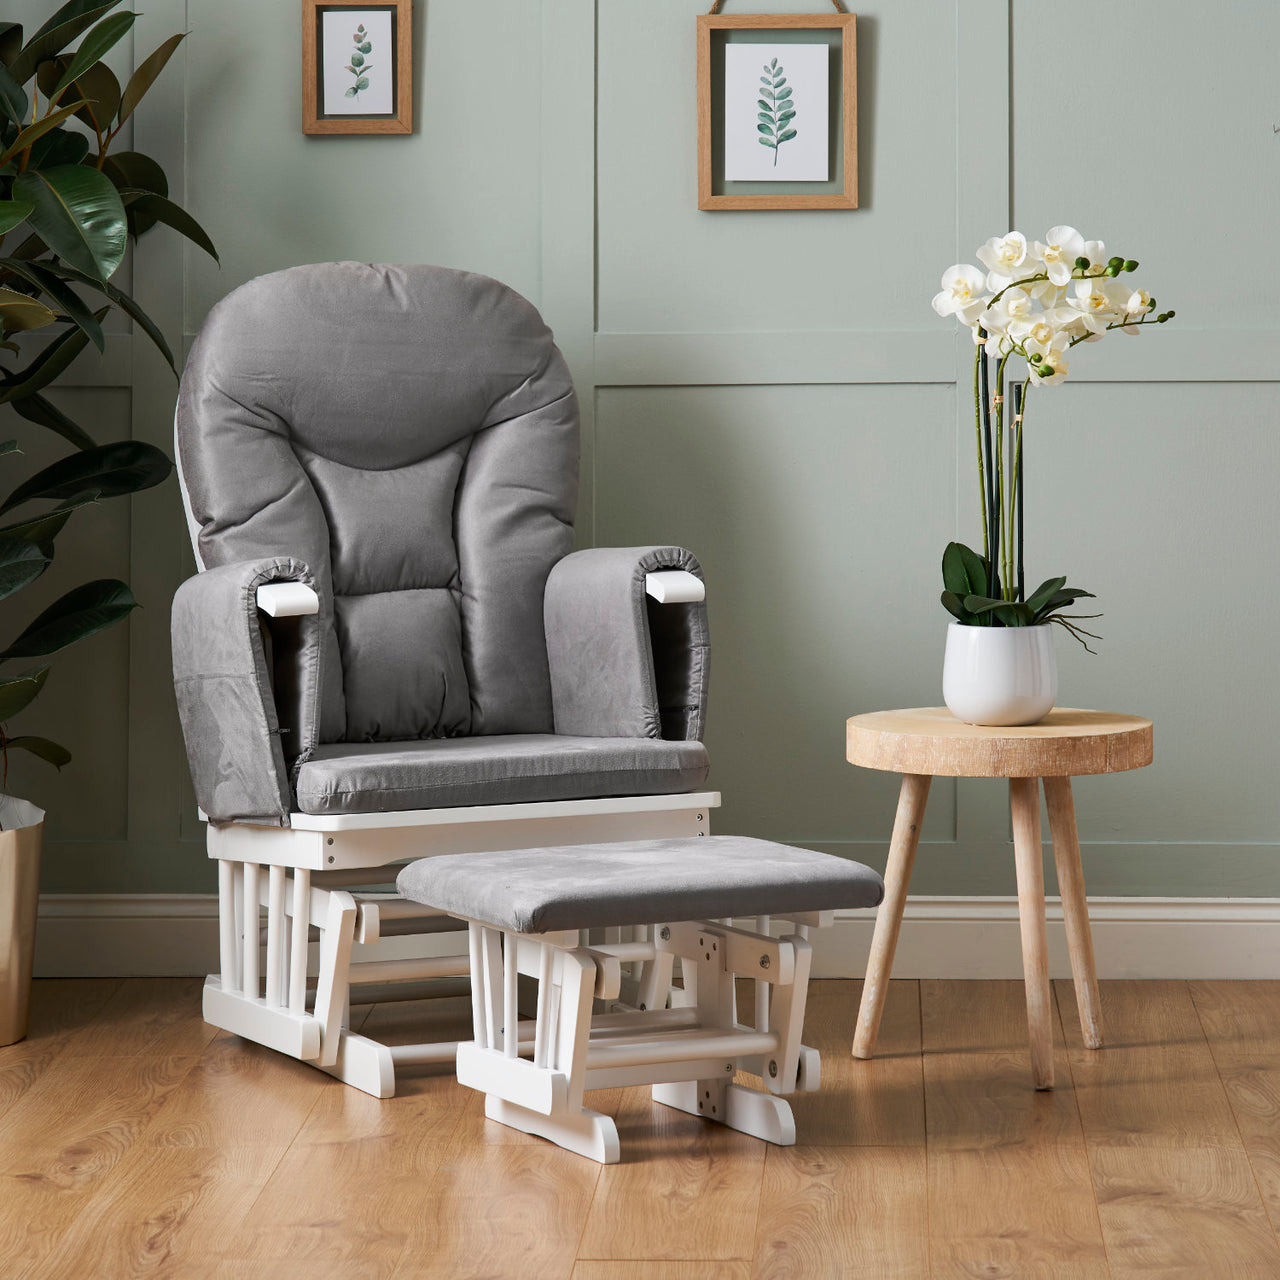 Reclining Glider Chair and Stool Grey